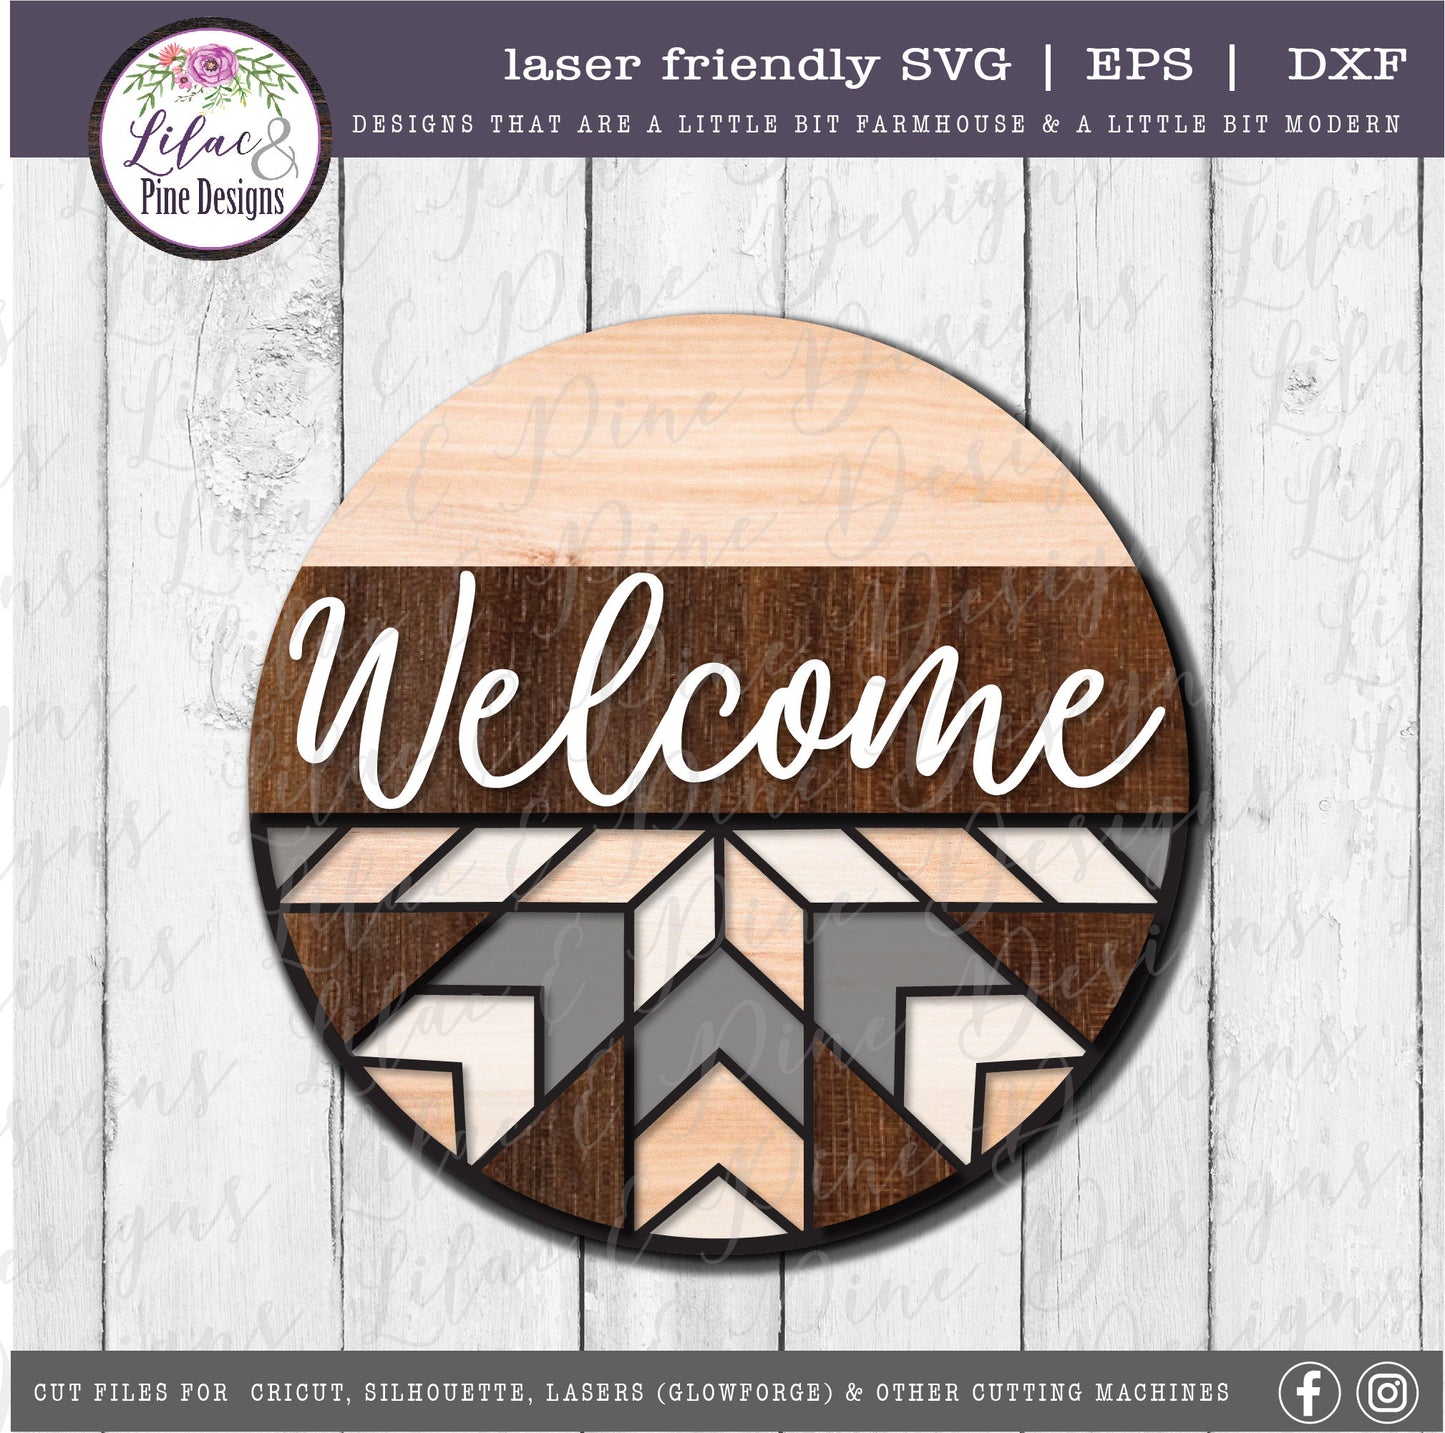 Welcome stained glass quilt round, quilt lover SVG, Welcome SVG, front door decor, round wood sign, geometric, Glowforge Svg, laser cut file